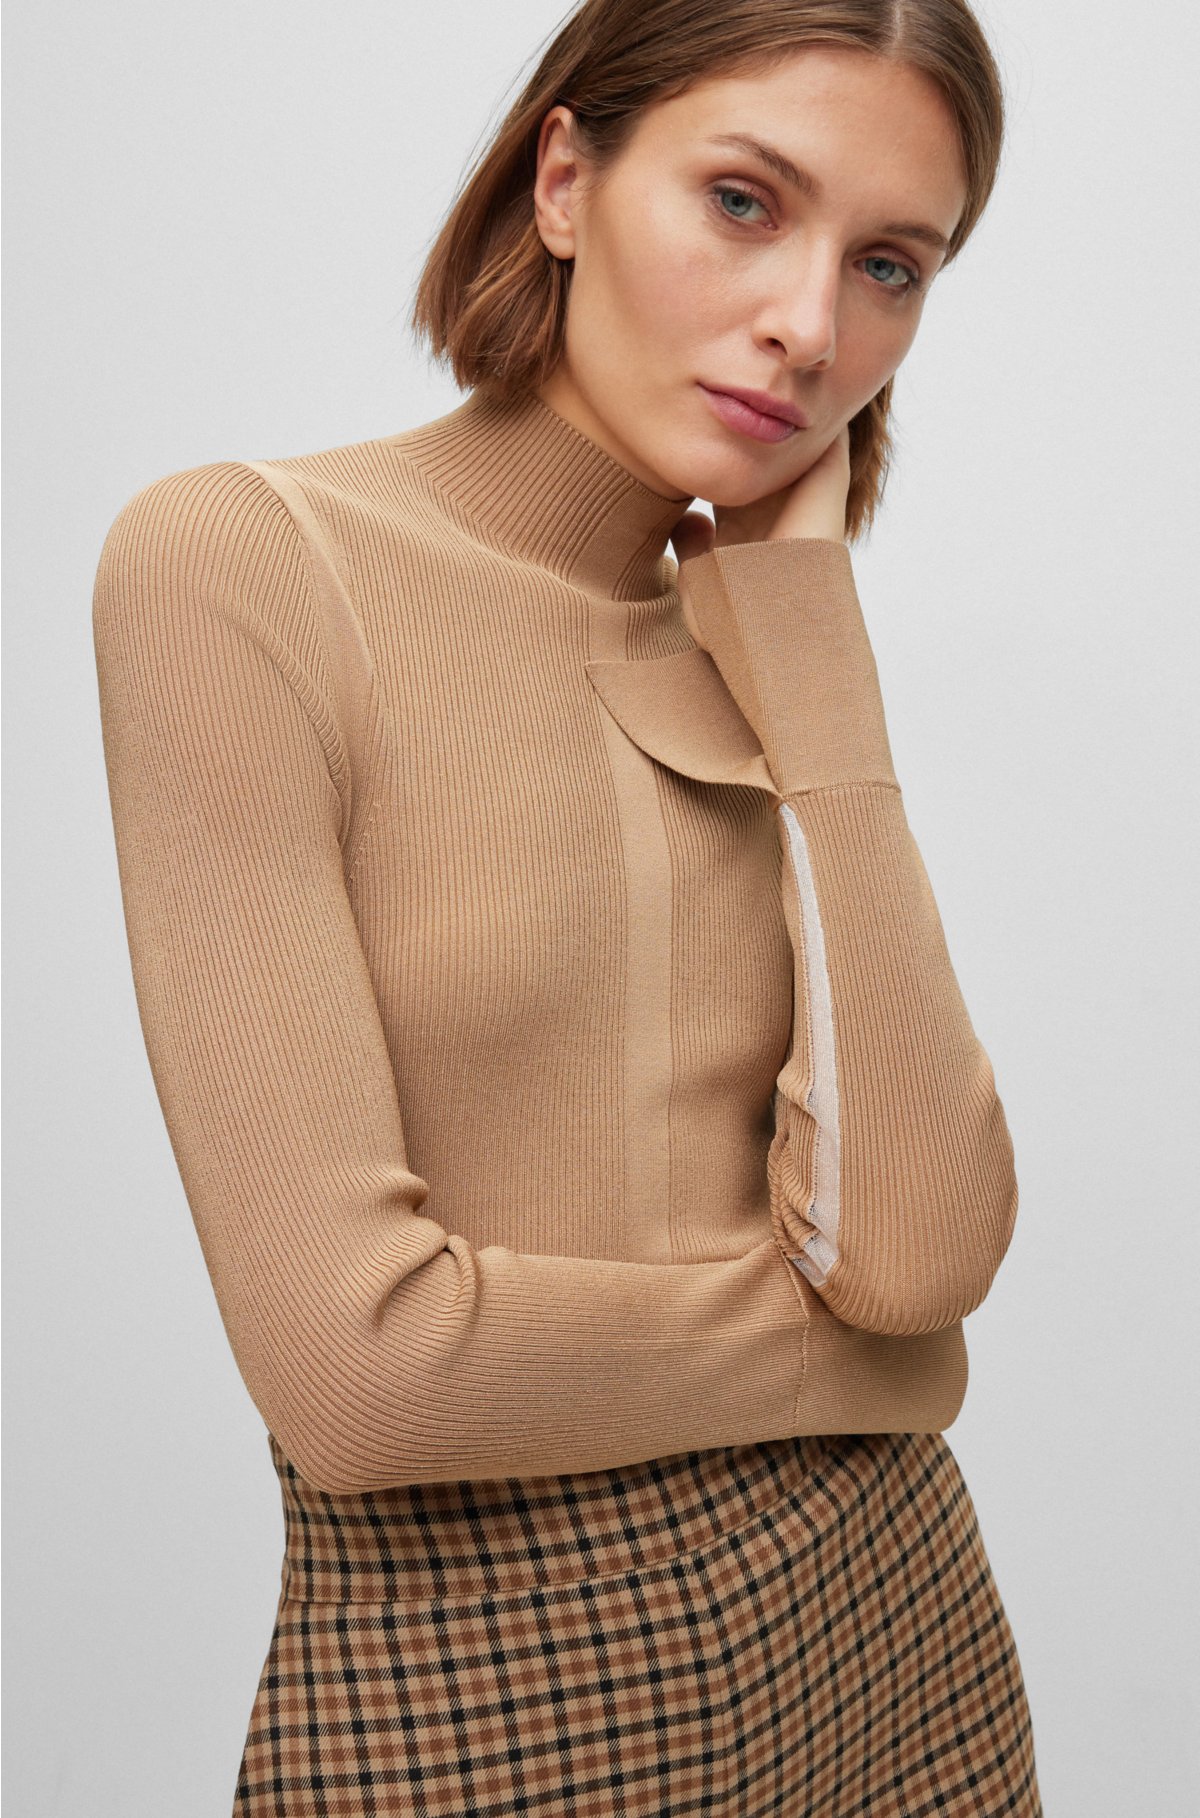 High-neck sweater in a ribbed knit